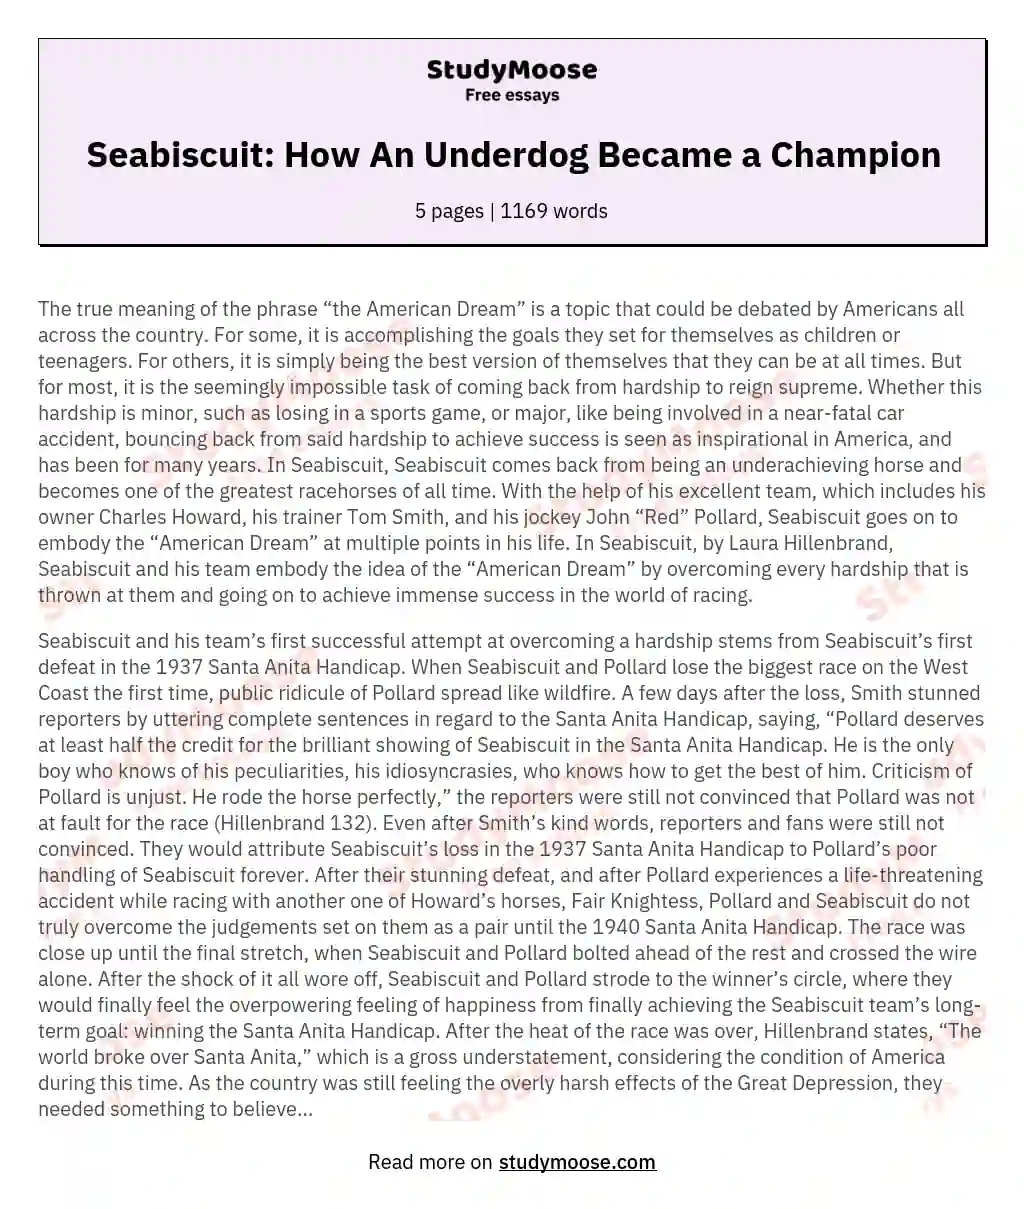 Seabiscuit: How An Underdog Became a Champion essay